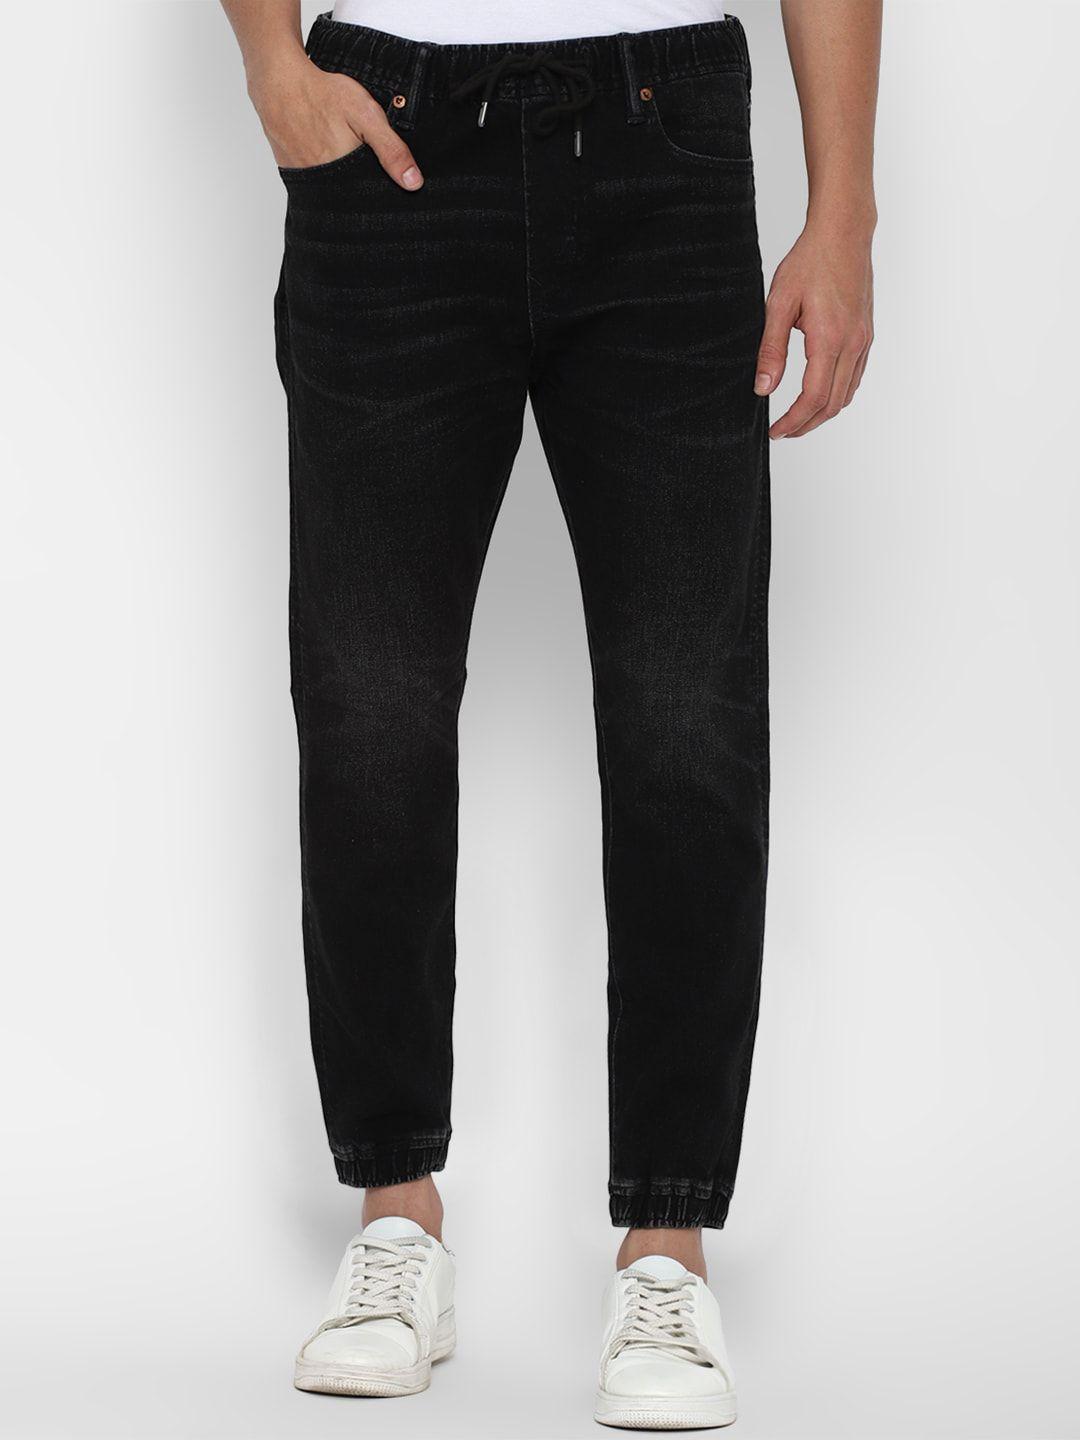 american-eagle-outfitters-men-black-jeans